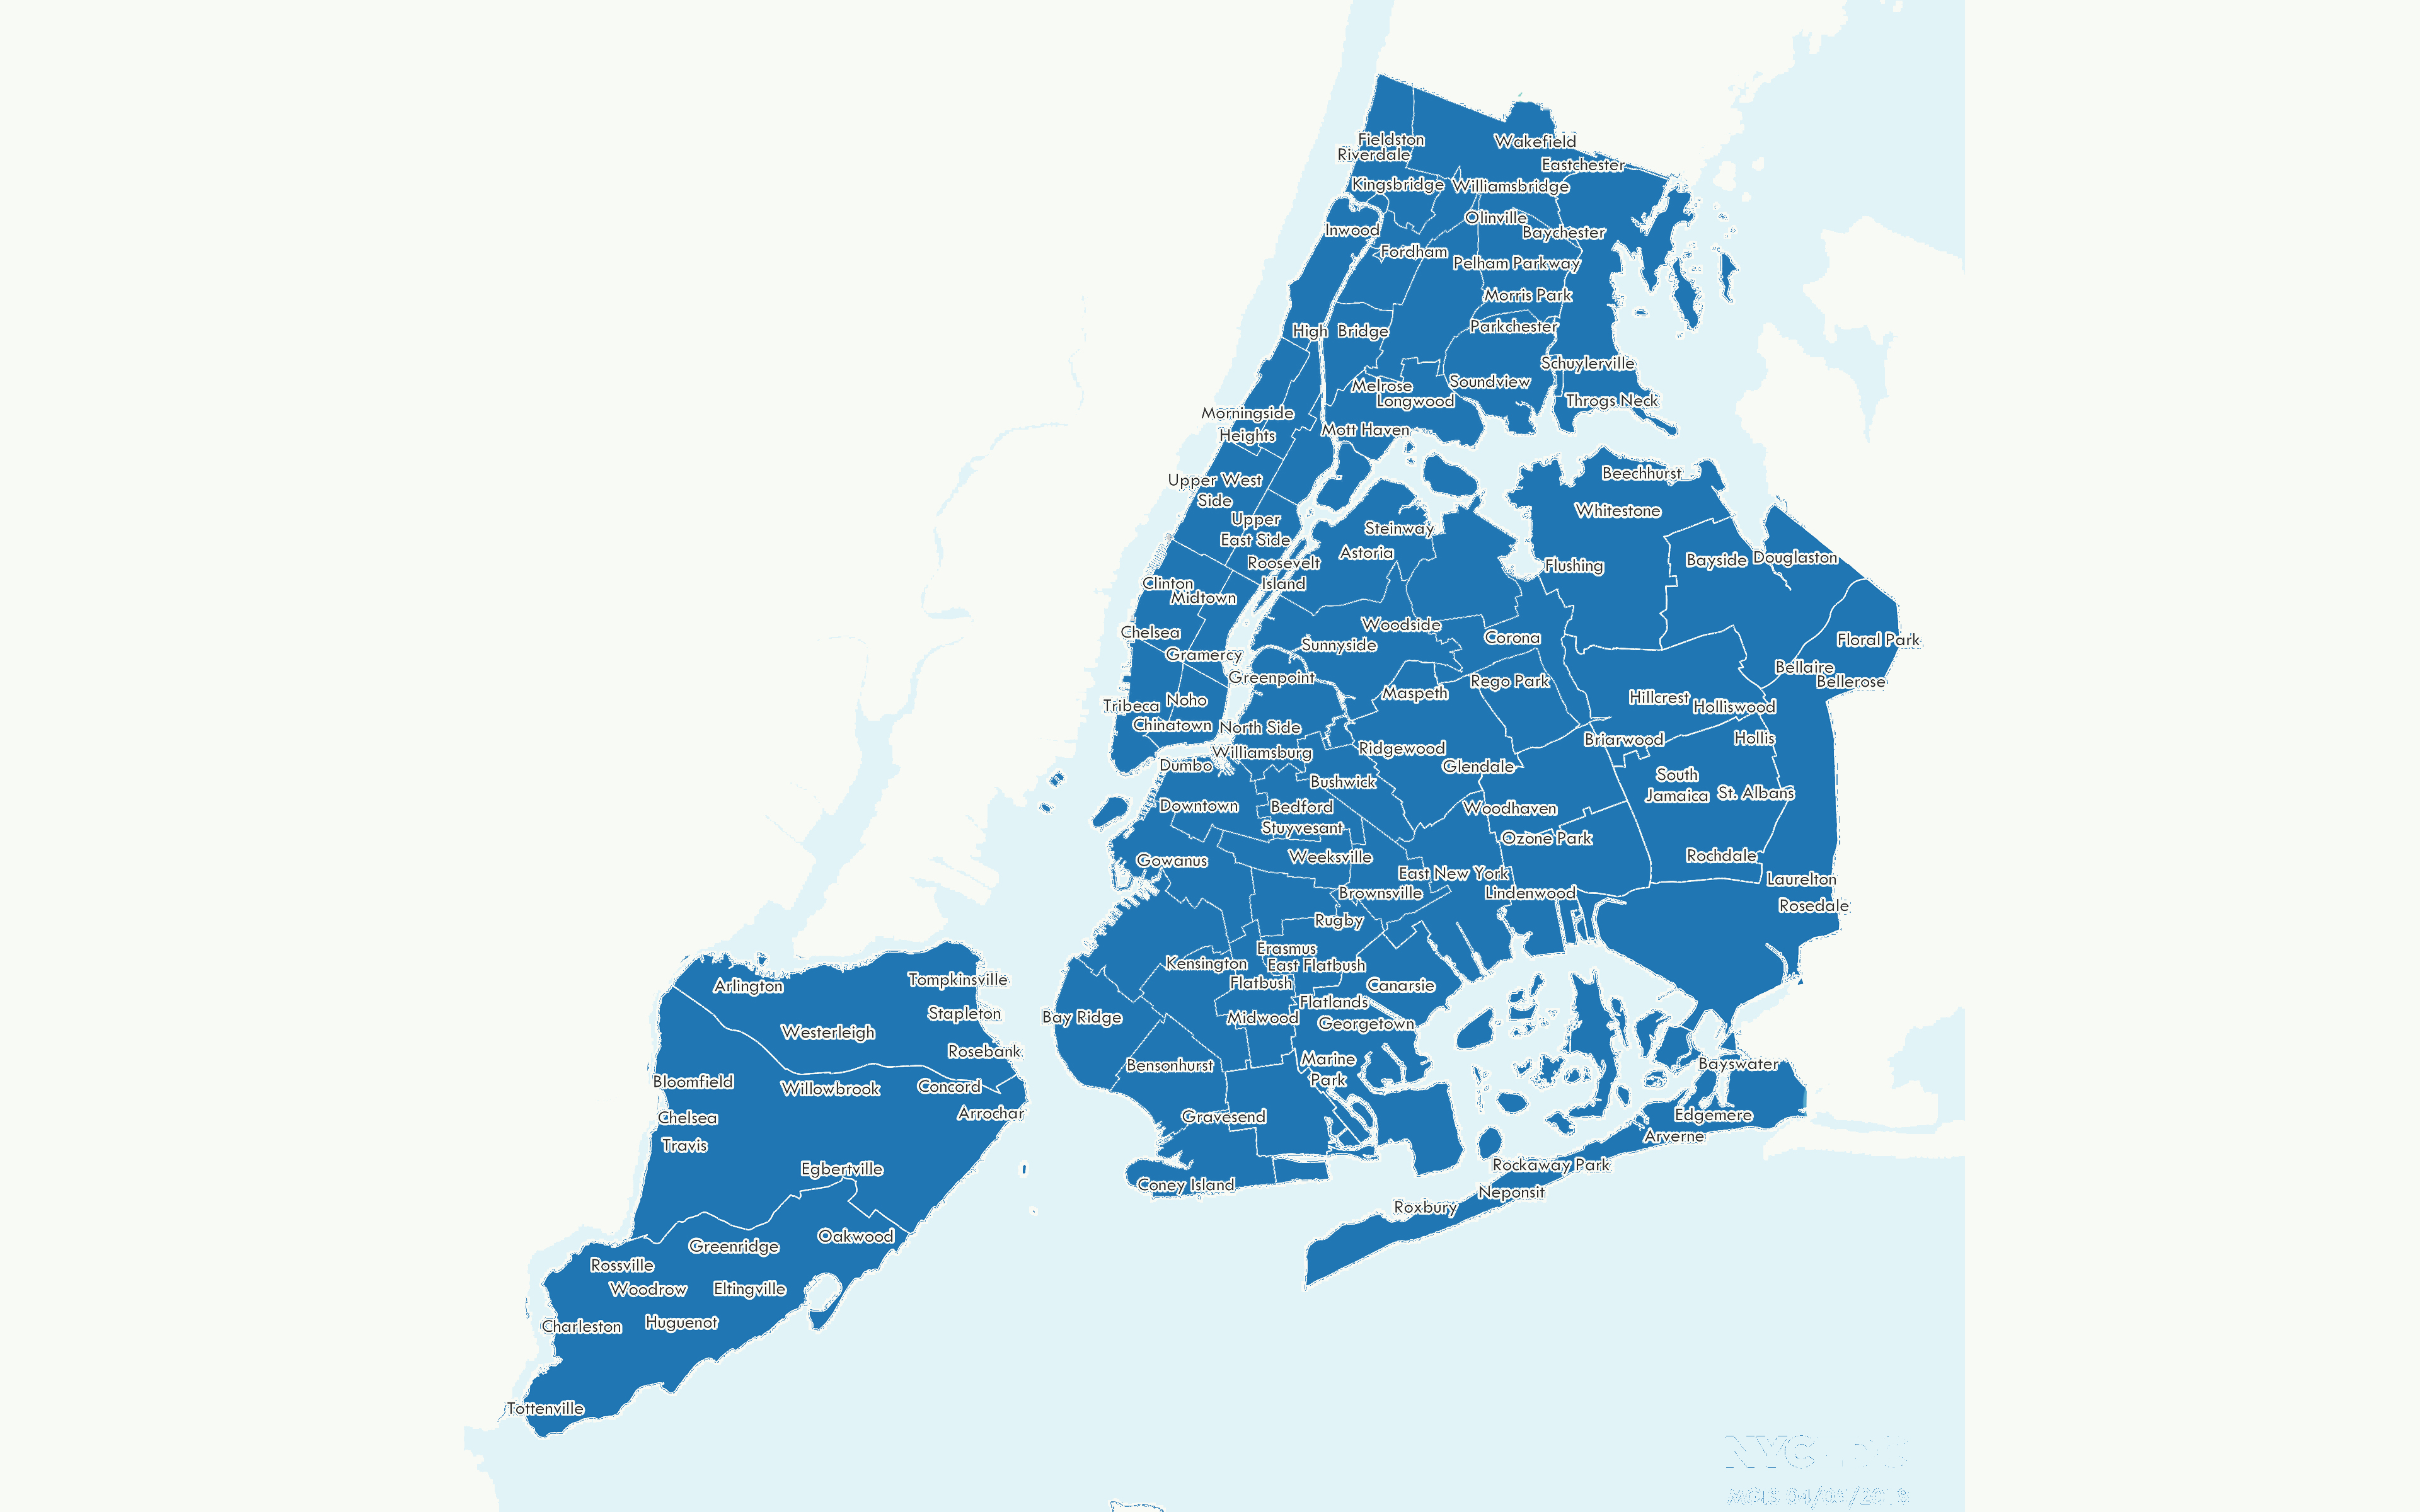 Download wallpaper New York City map, NYC map, USA, New York areas map, Boroughs of New York City map, map of american cities, maps of cities of the USA, New York for